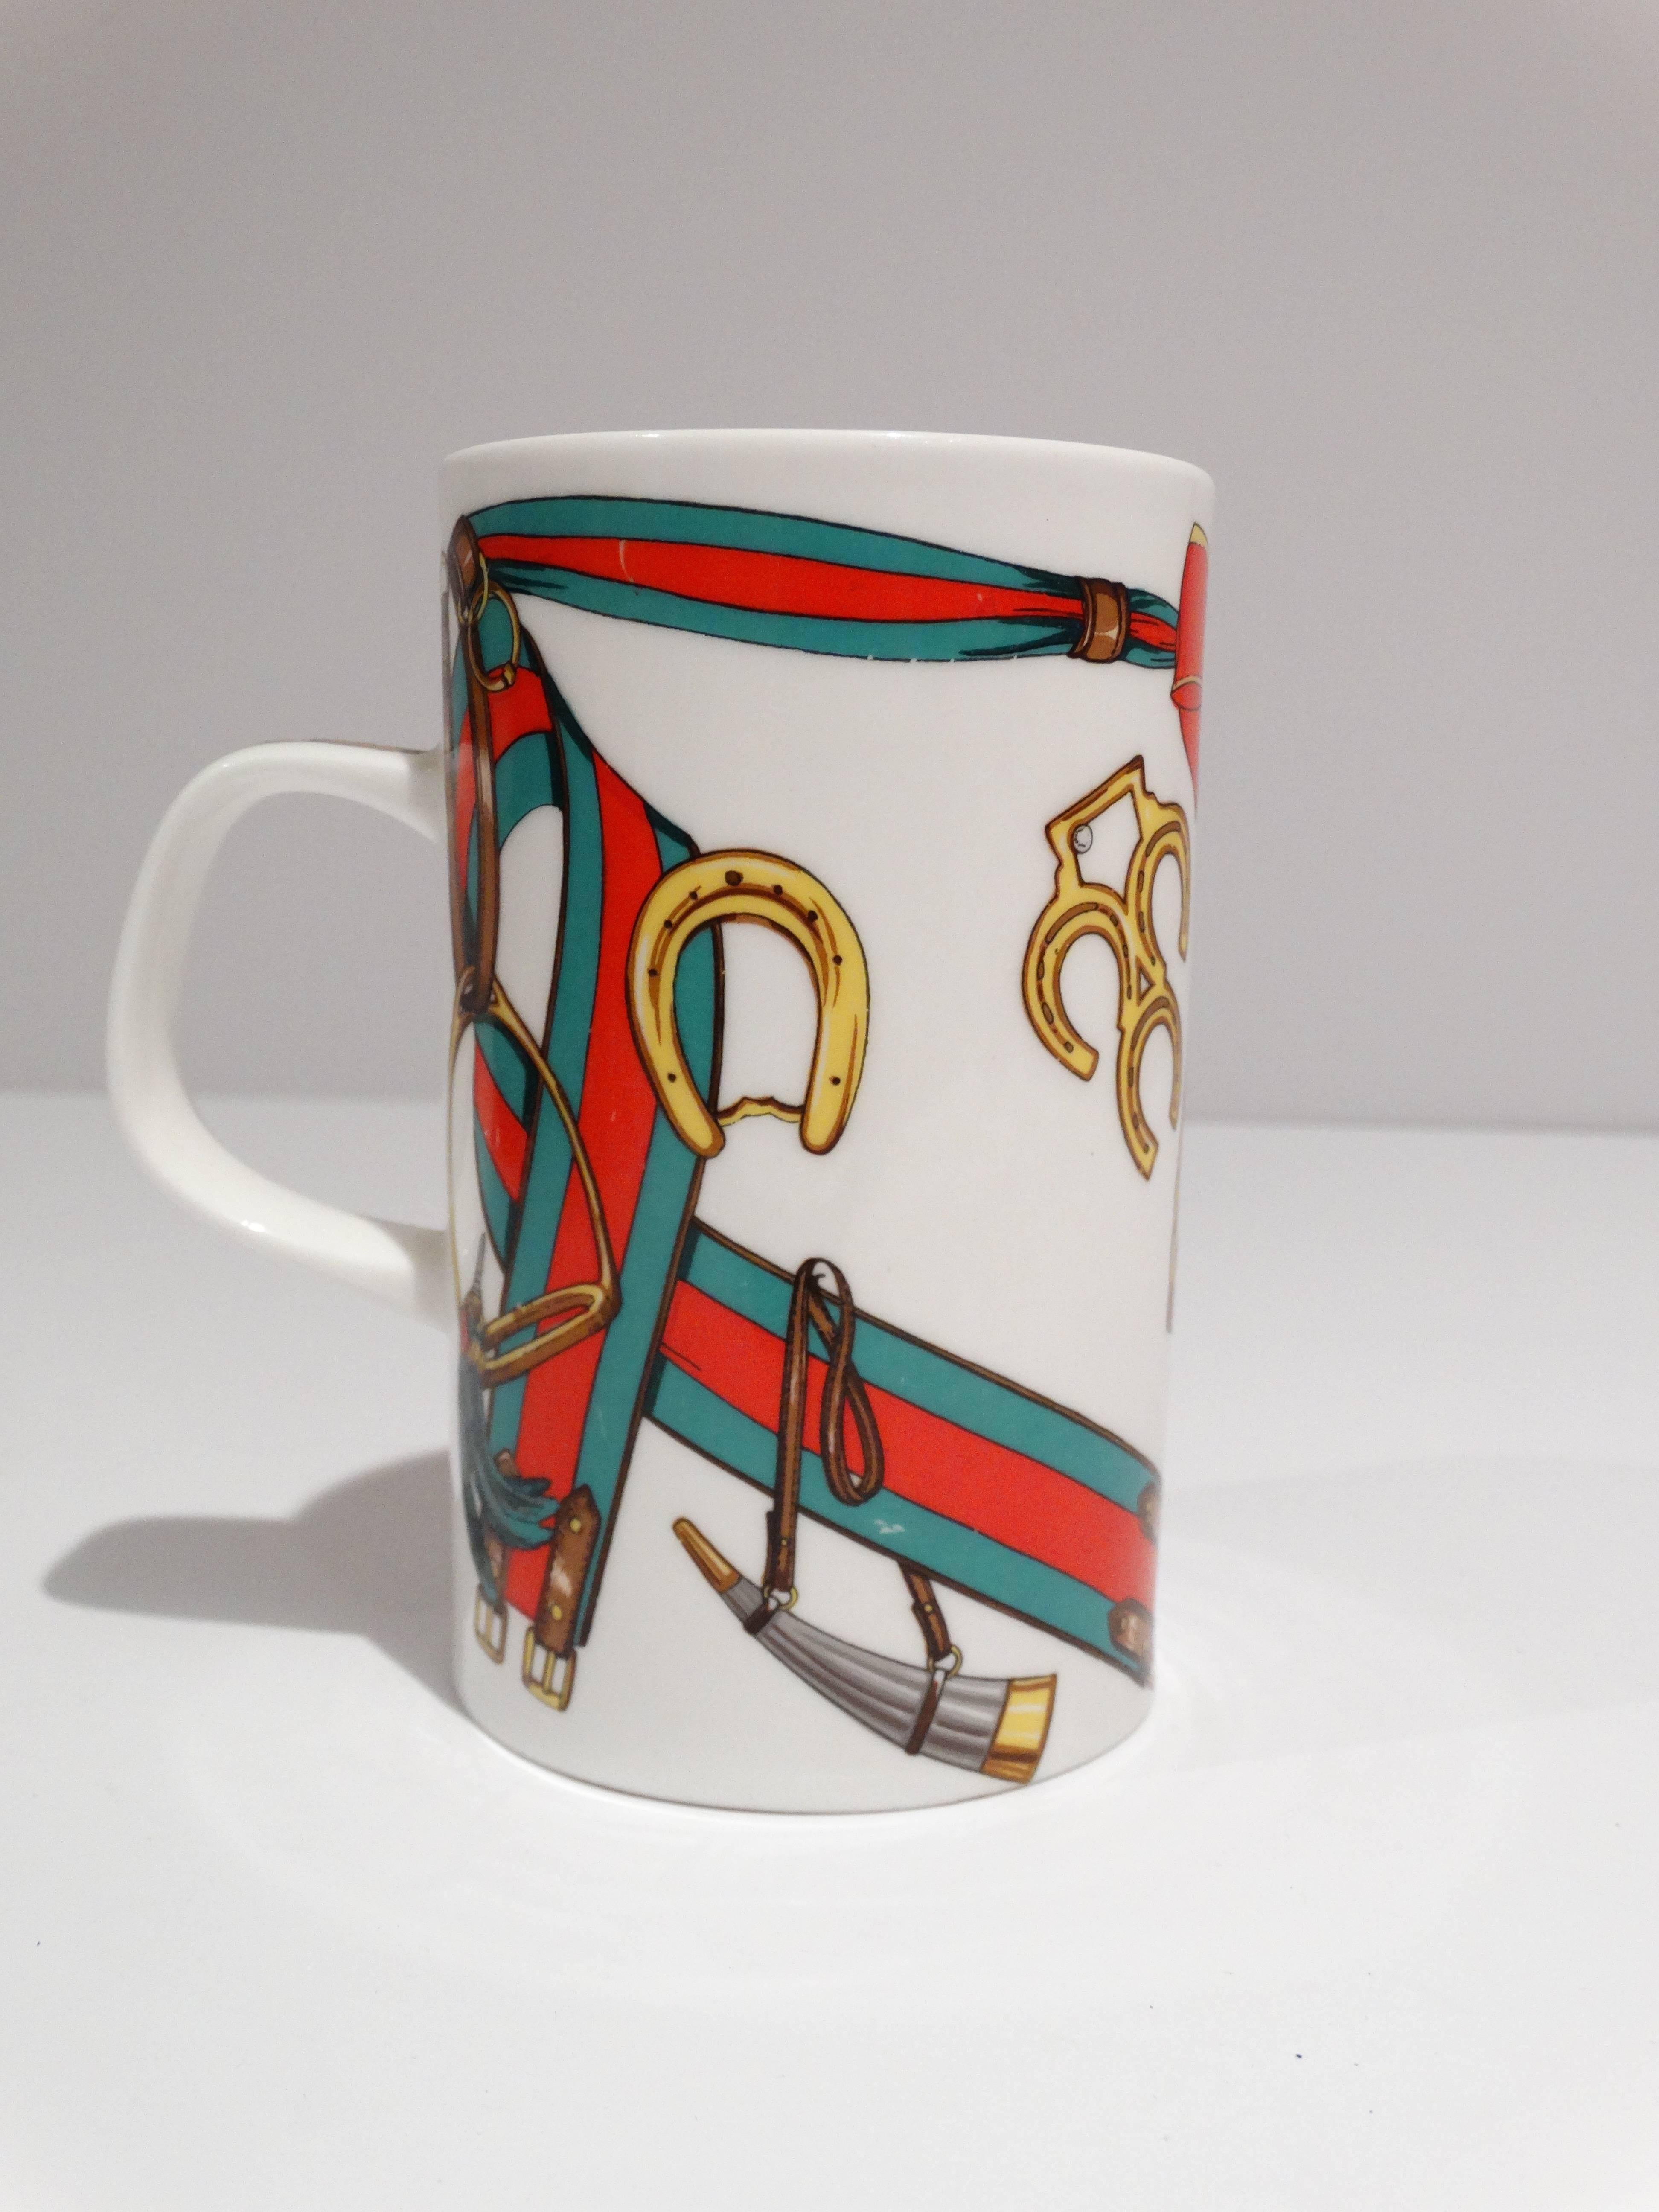 Wonderful GUCCI  holiday cup from the 1980's.  In excellent condition. No chips or cracks. Great for desk objet. 

Details: Fine Bone China / Made in England. 
Cup Height: 4 inches. 